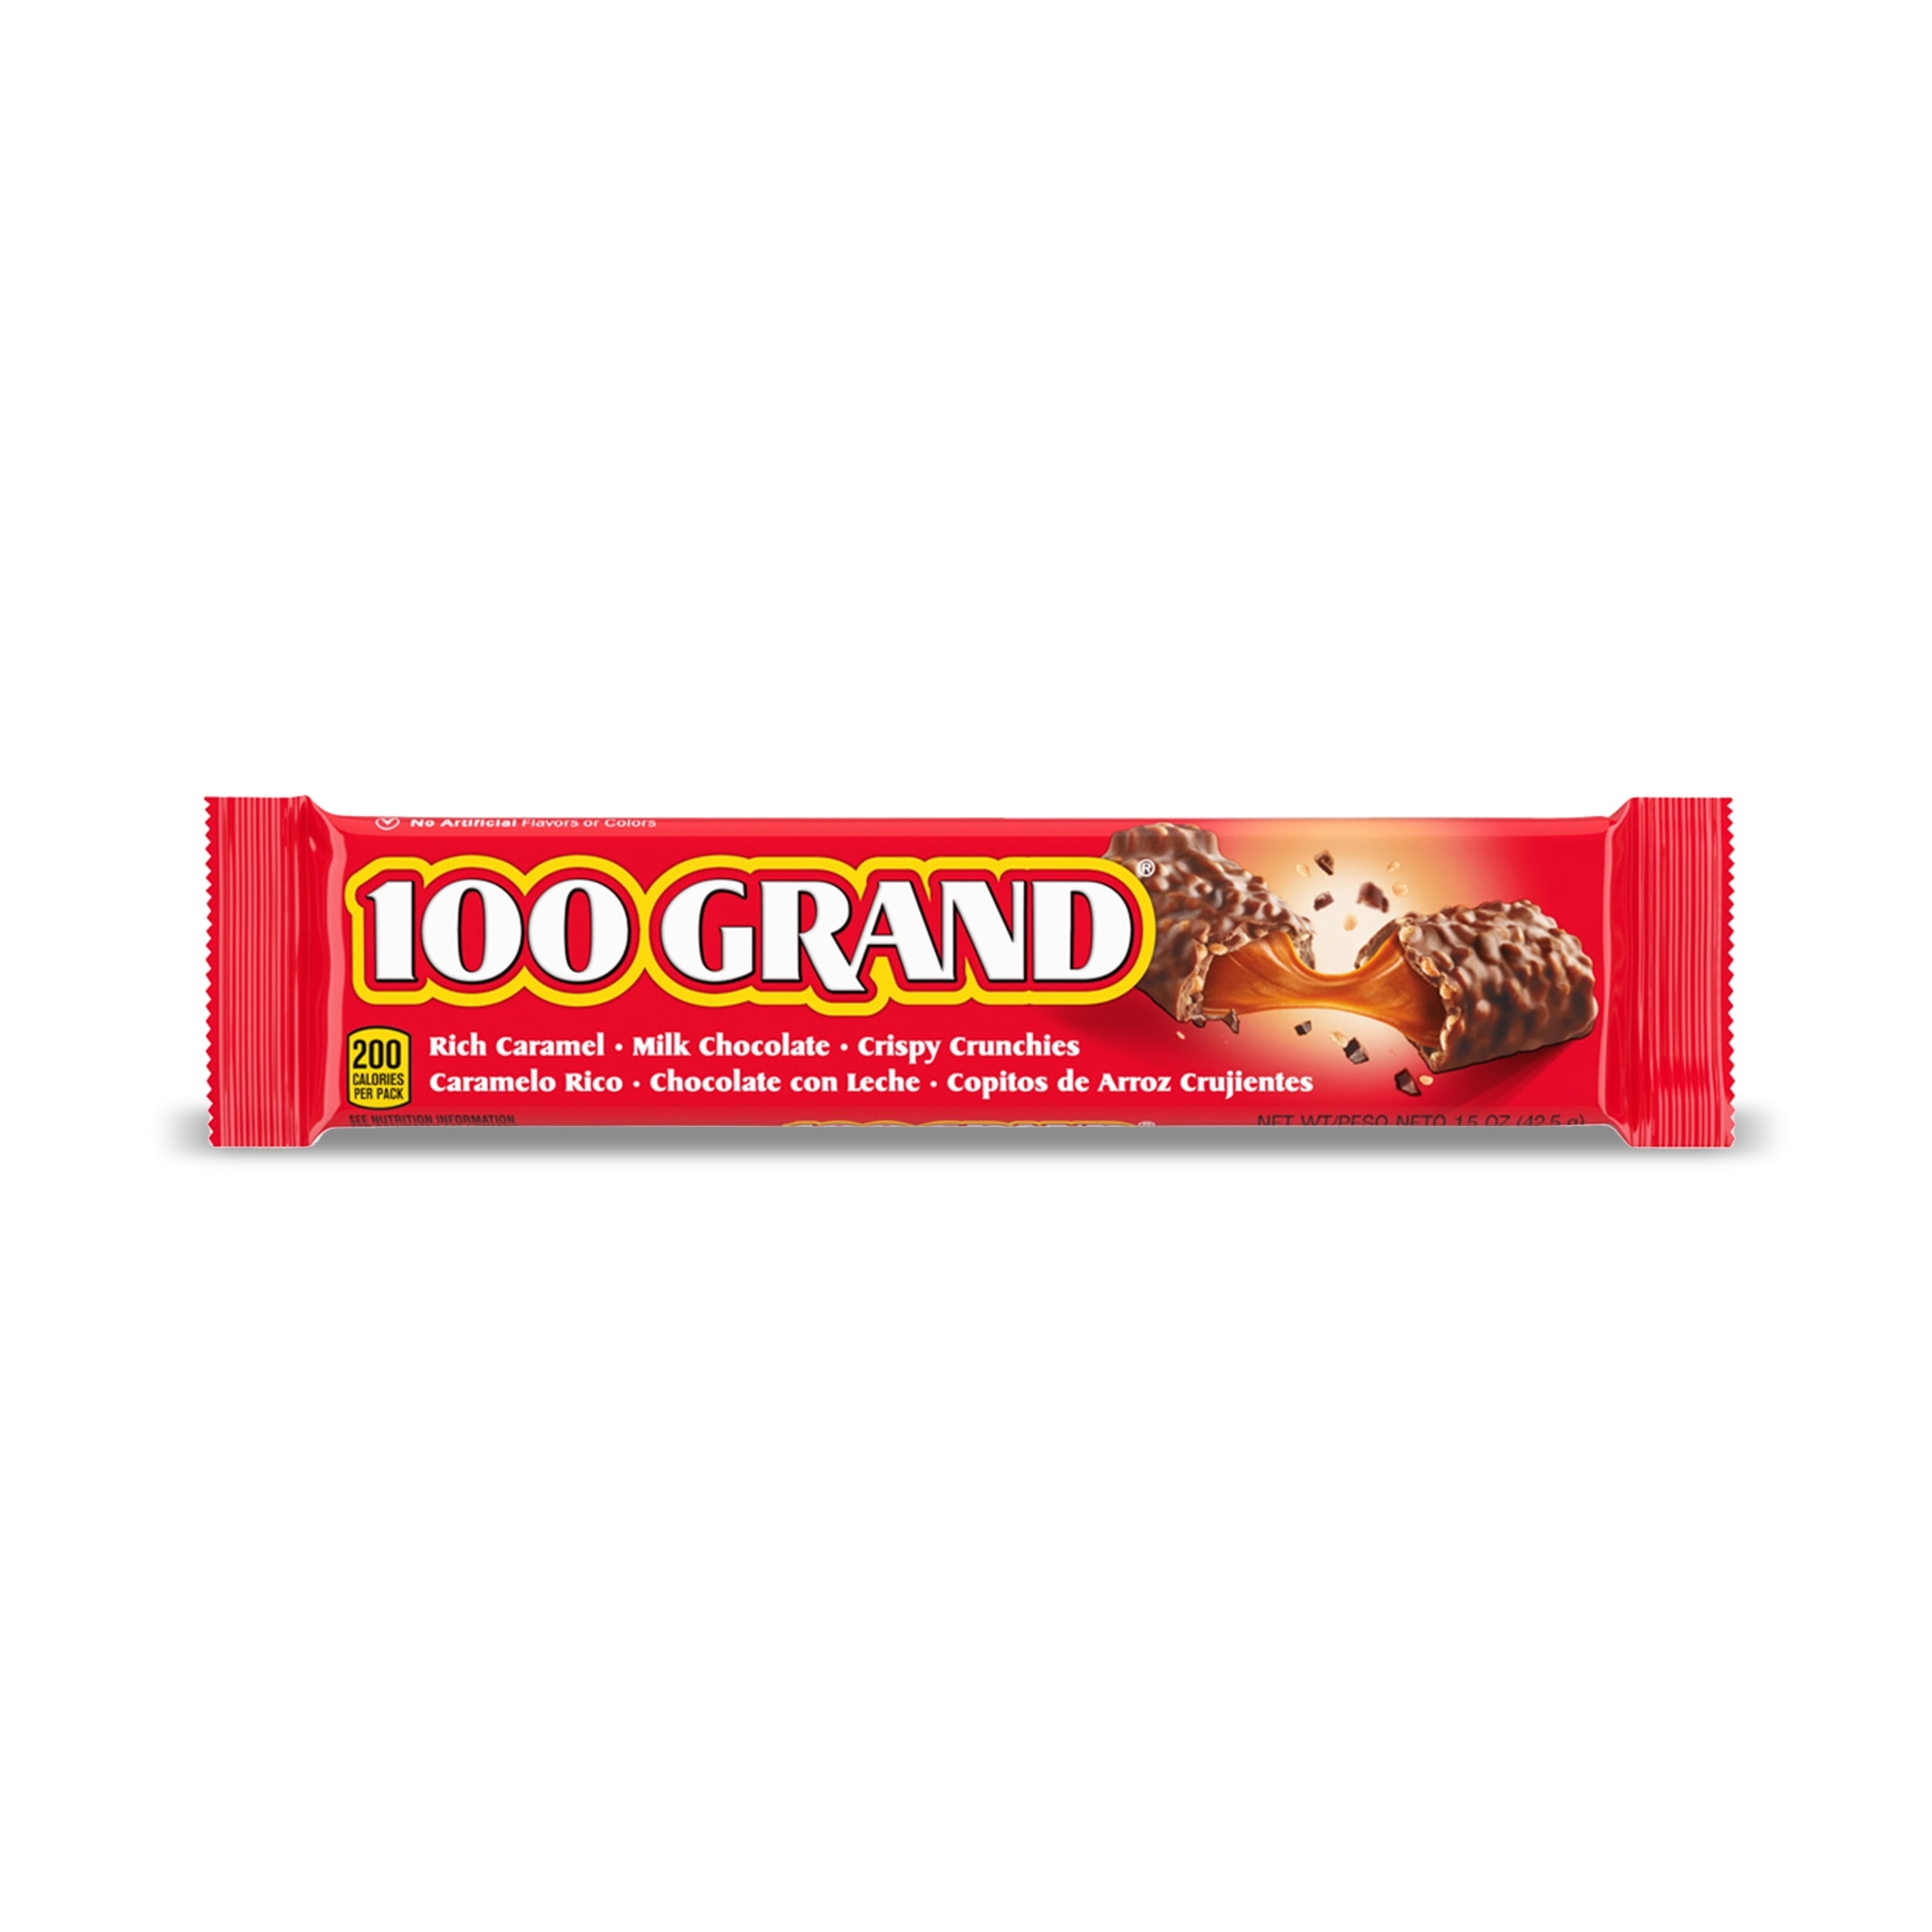 100 Grand, Crispy Milk Chocolate with Caramel, Full Size Individually  Wrapped Candy Bar, Great for Halloween Candy,  oz 